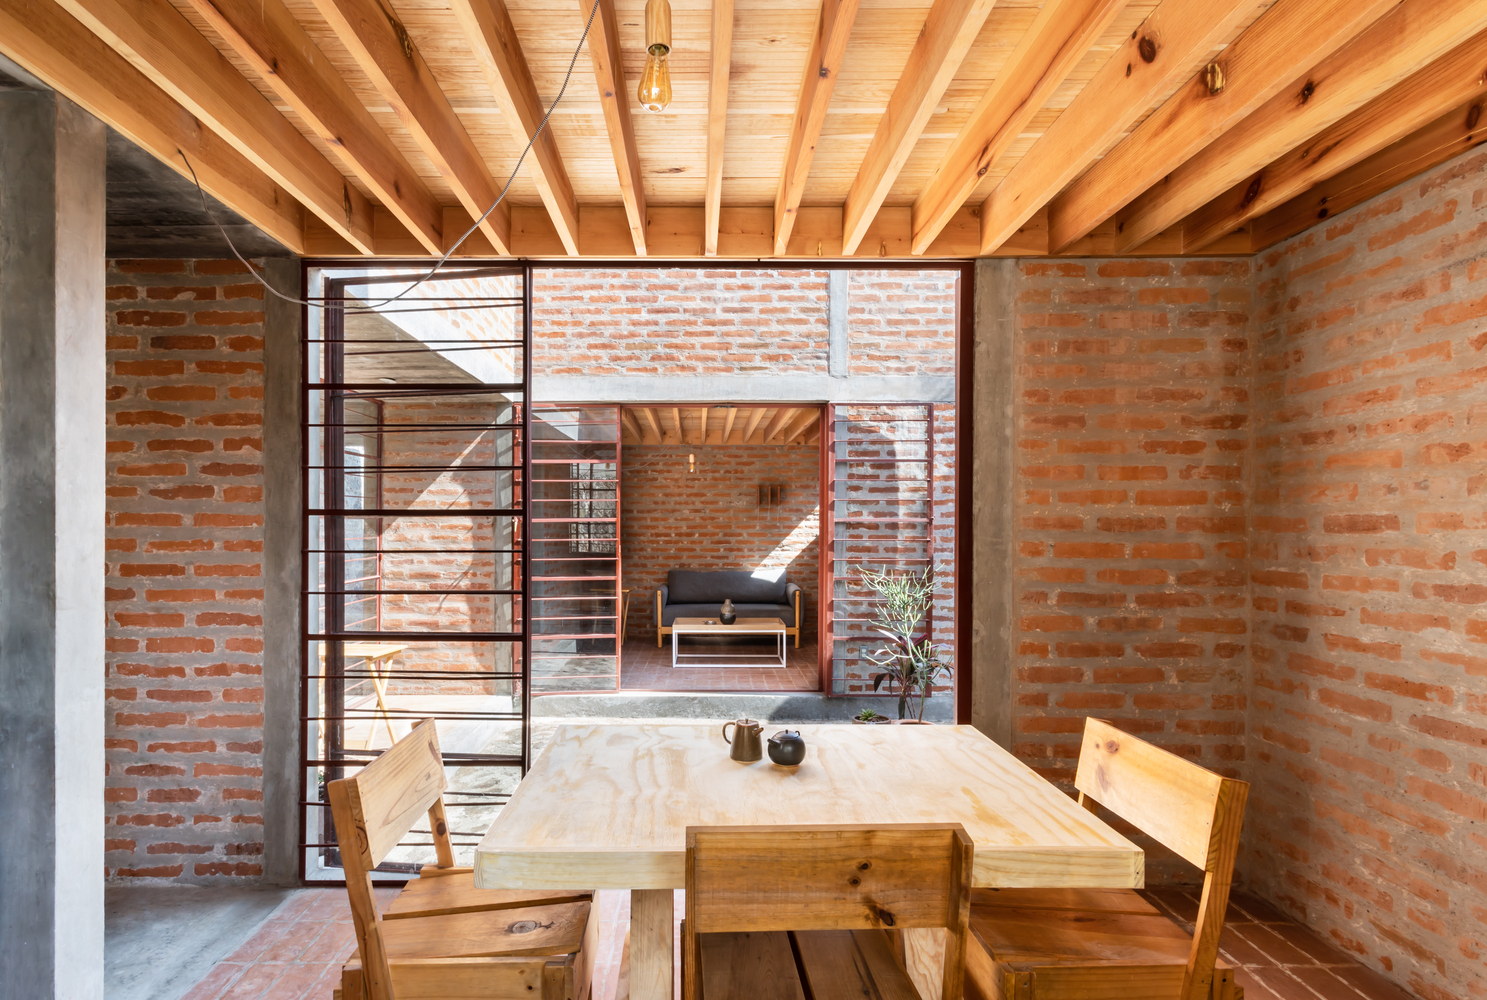 Dining area with wooden table looking out onto courtyard.